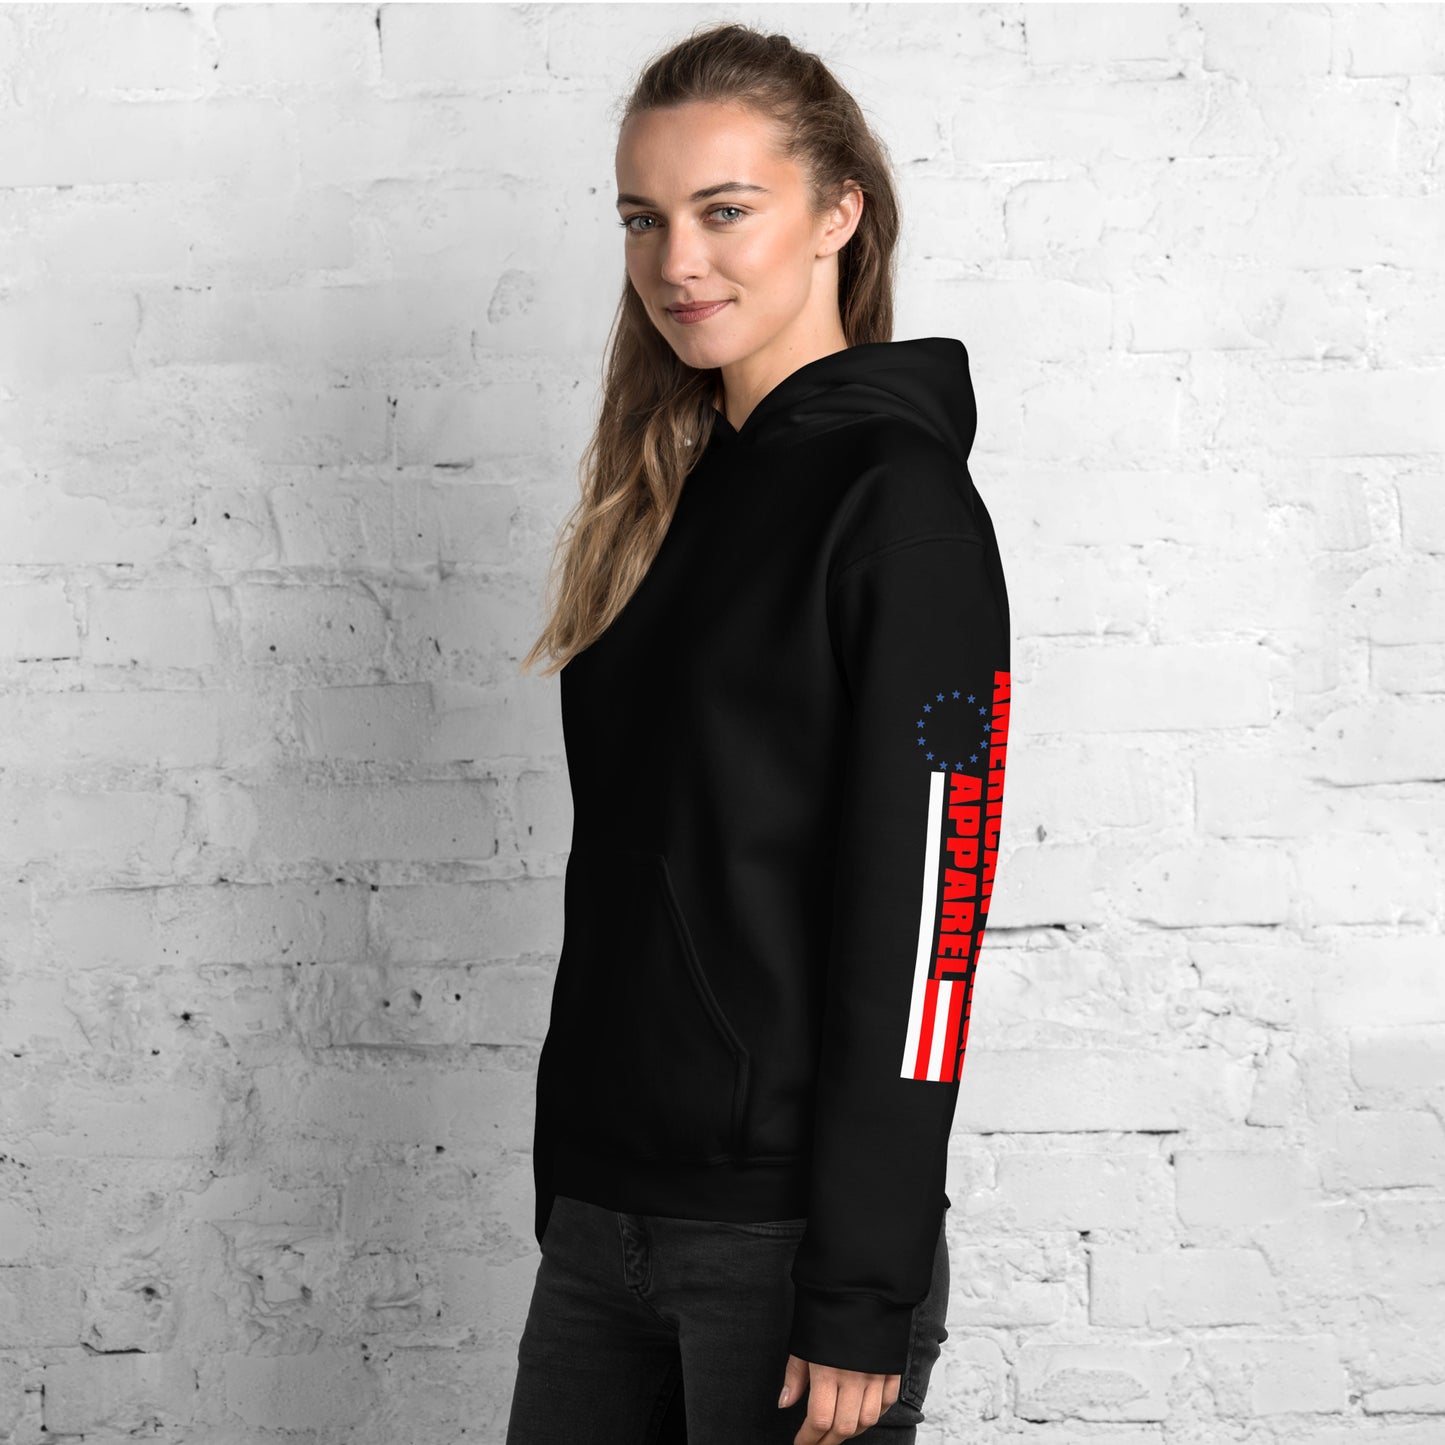 …She Was Looking For A Sword Unisex Hoodie